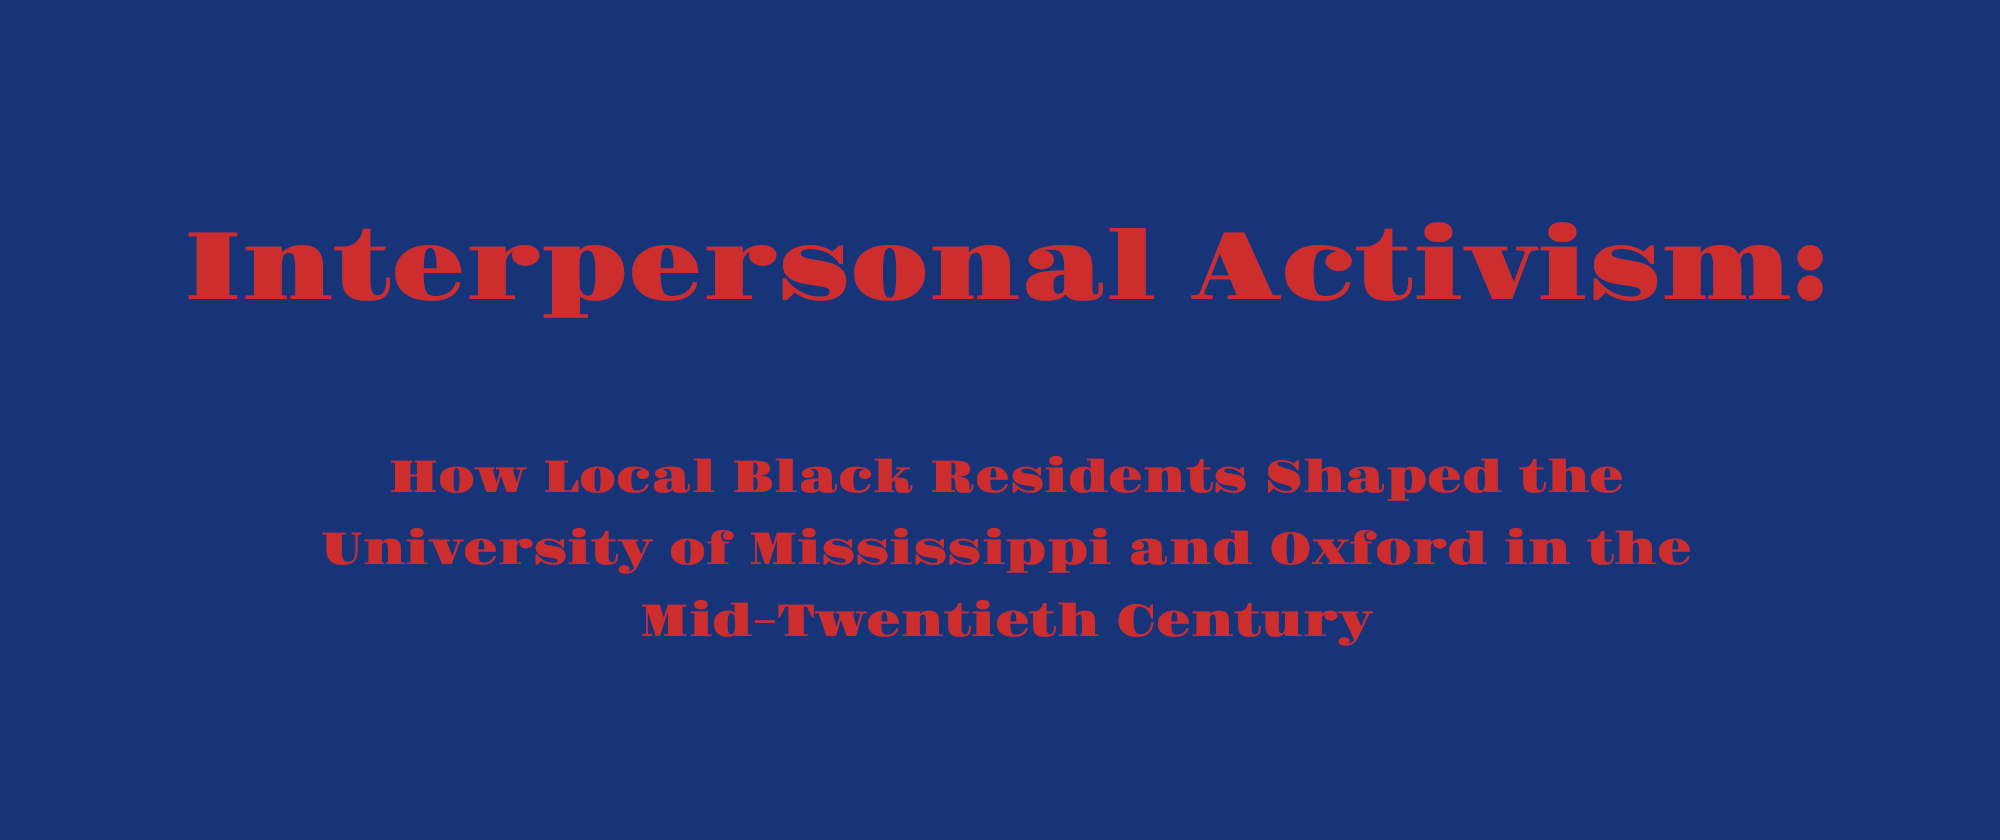 Interpersonal Activism: How Local Black Residents Shaped the University of Mississippi and Oxford in the Mid-Twentieth Century